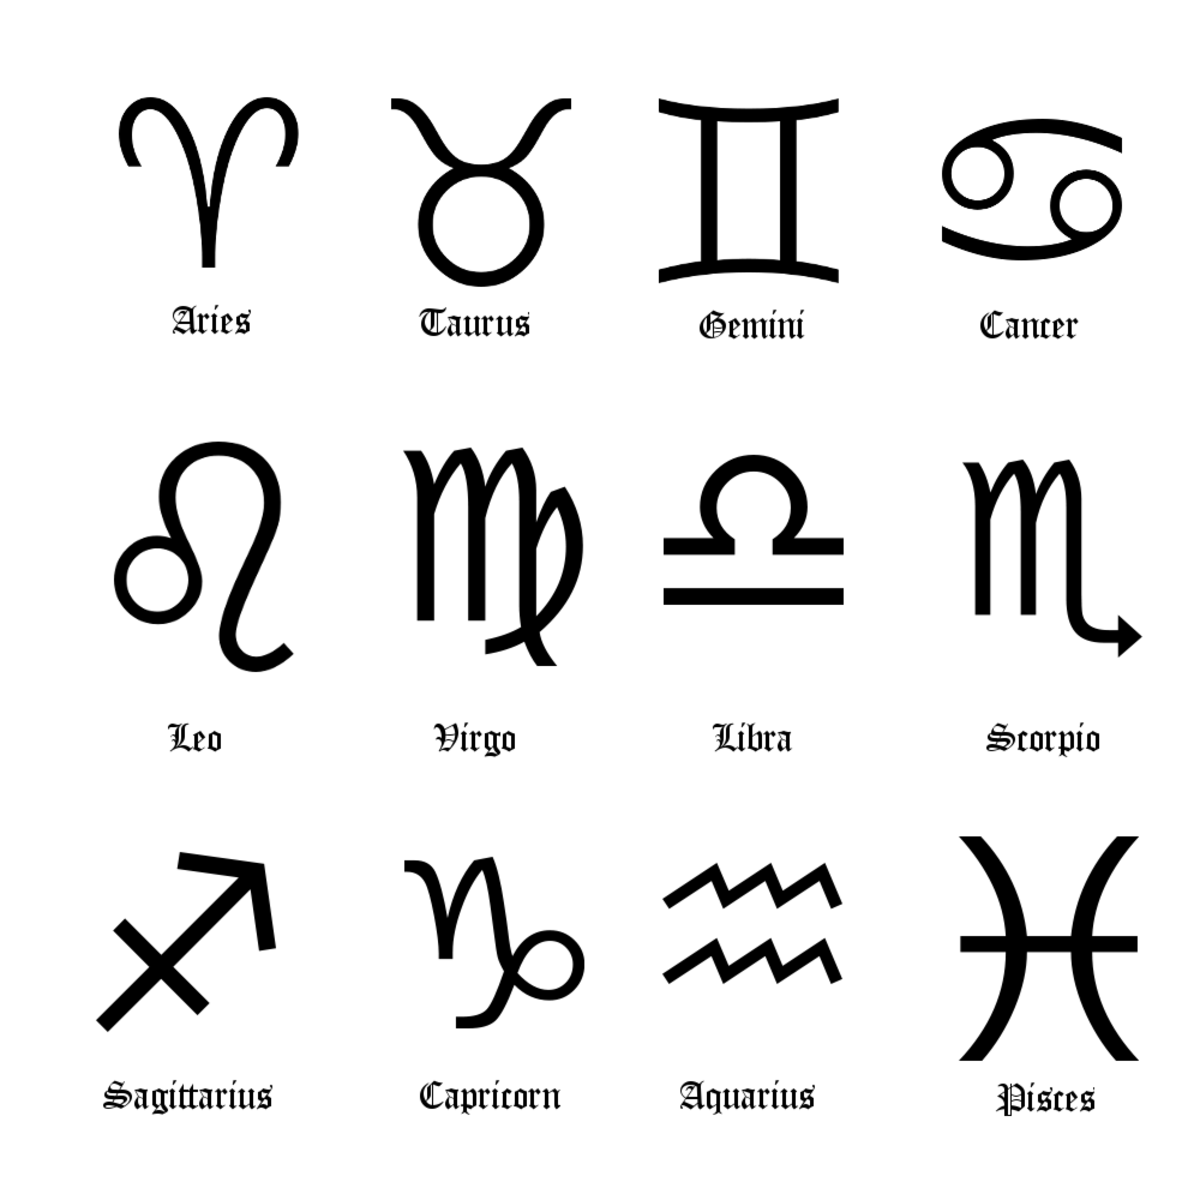 Signs of the constellations of the zodiac.